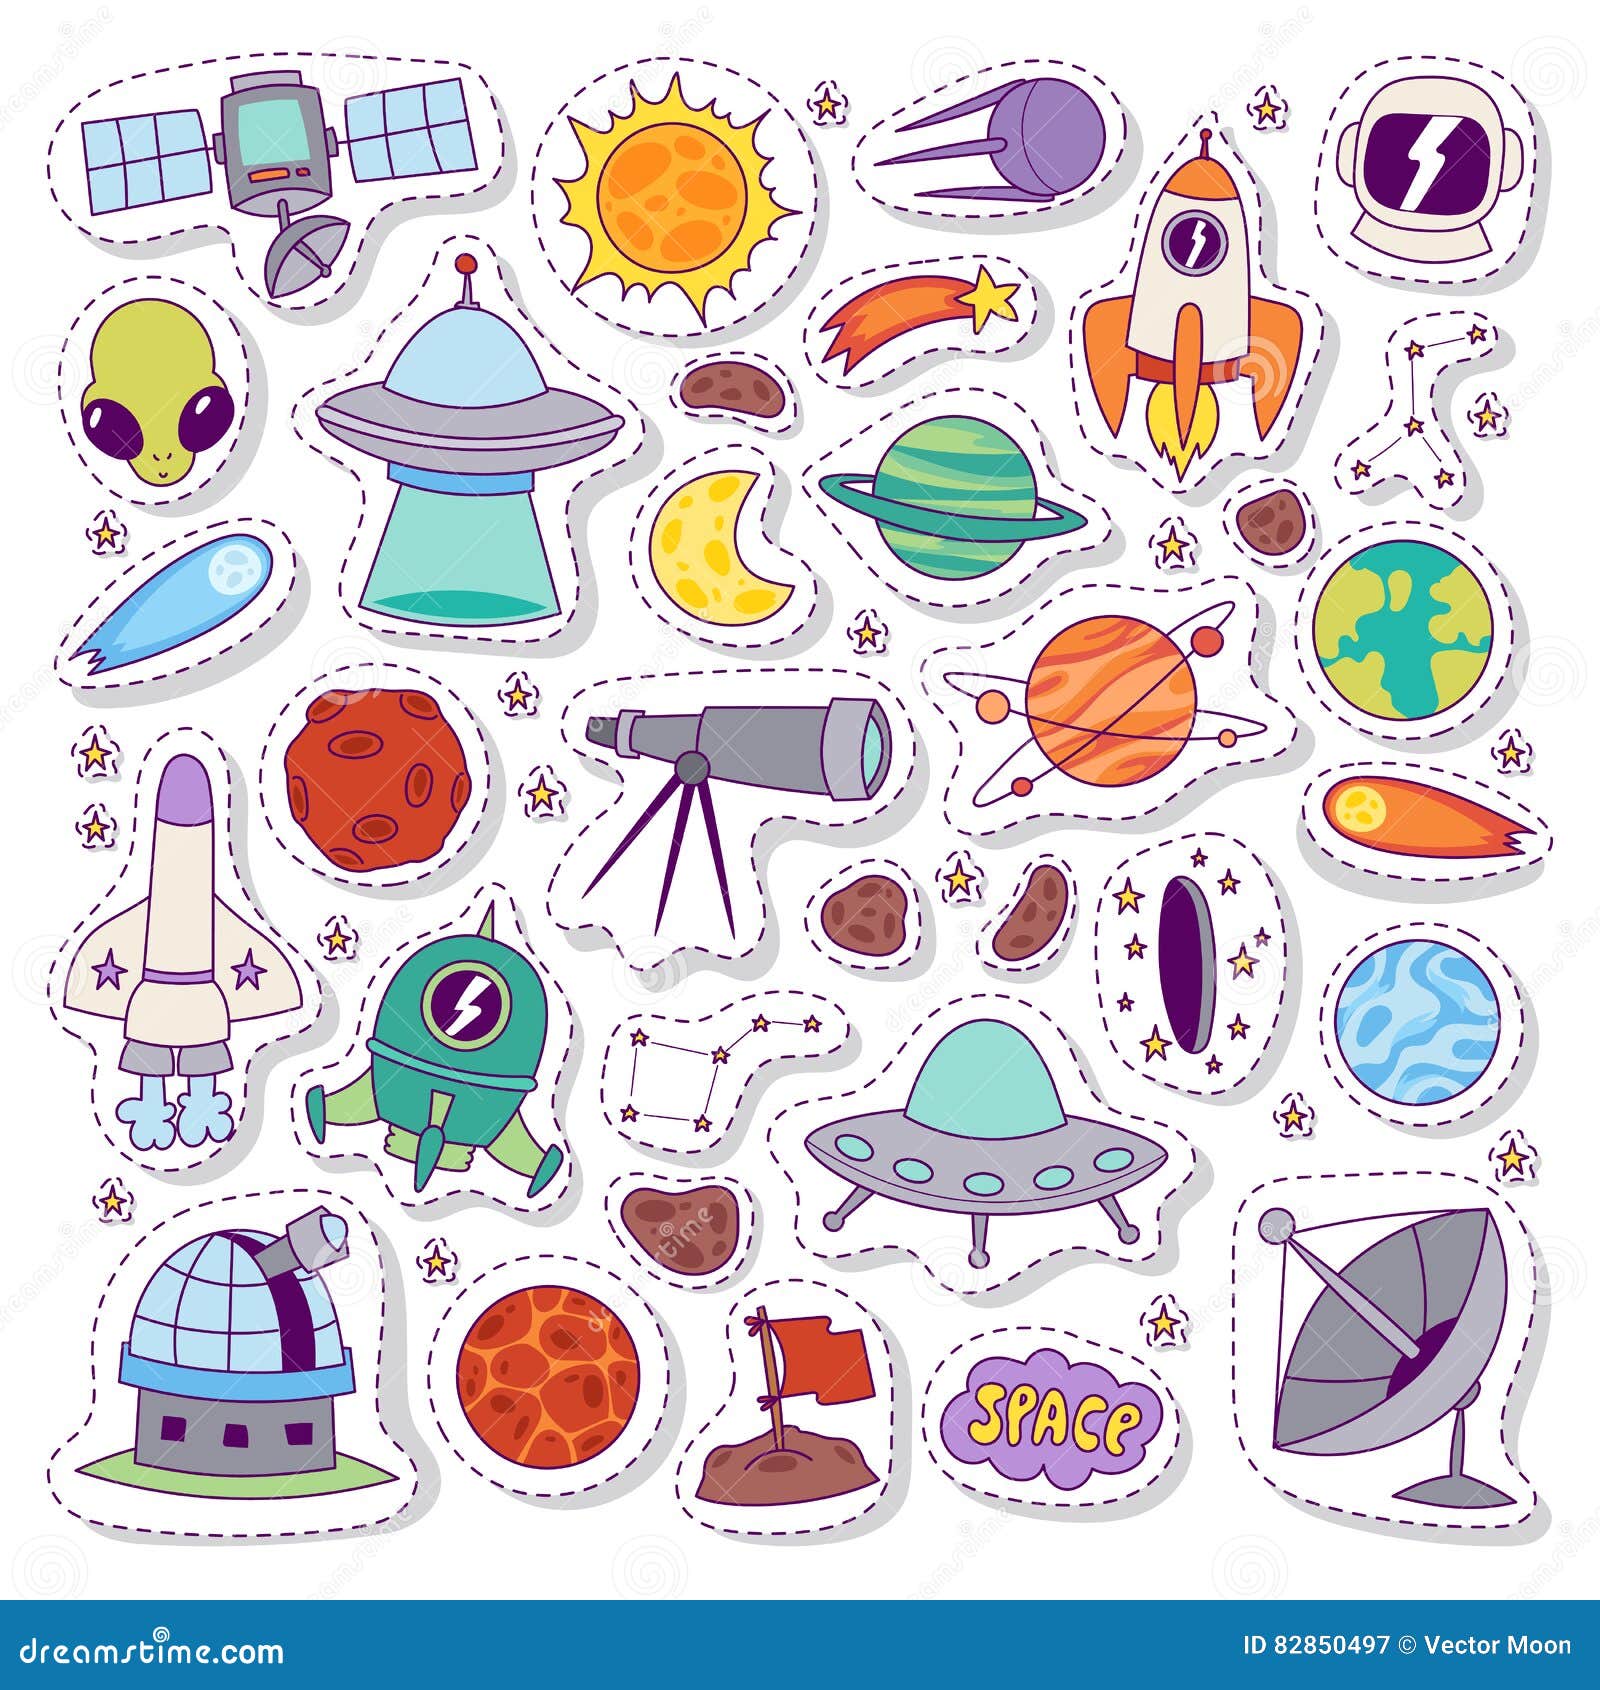 solar system astronomy icons stickers  set.